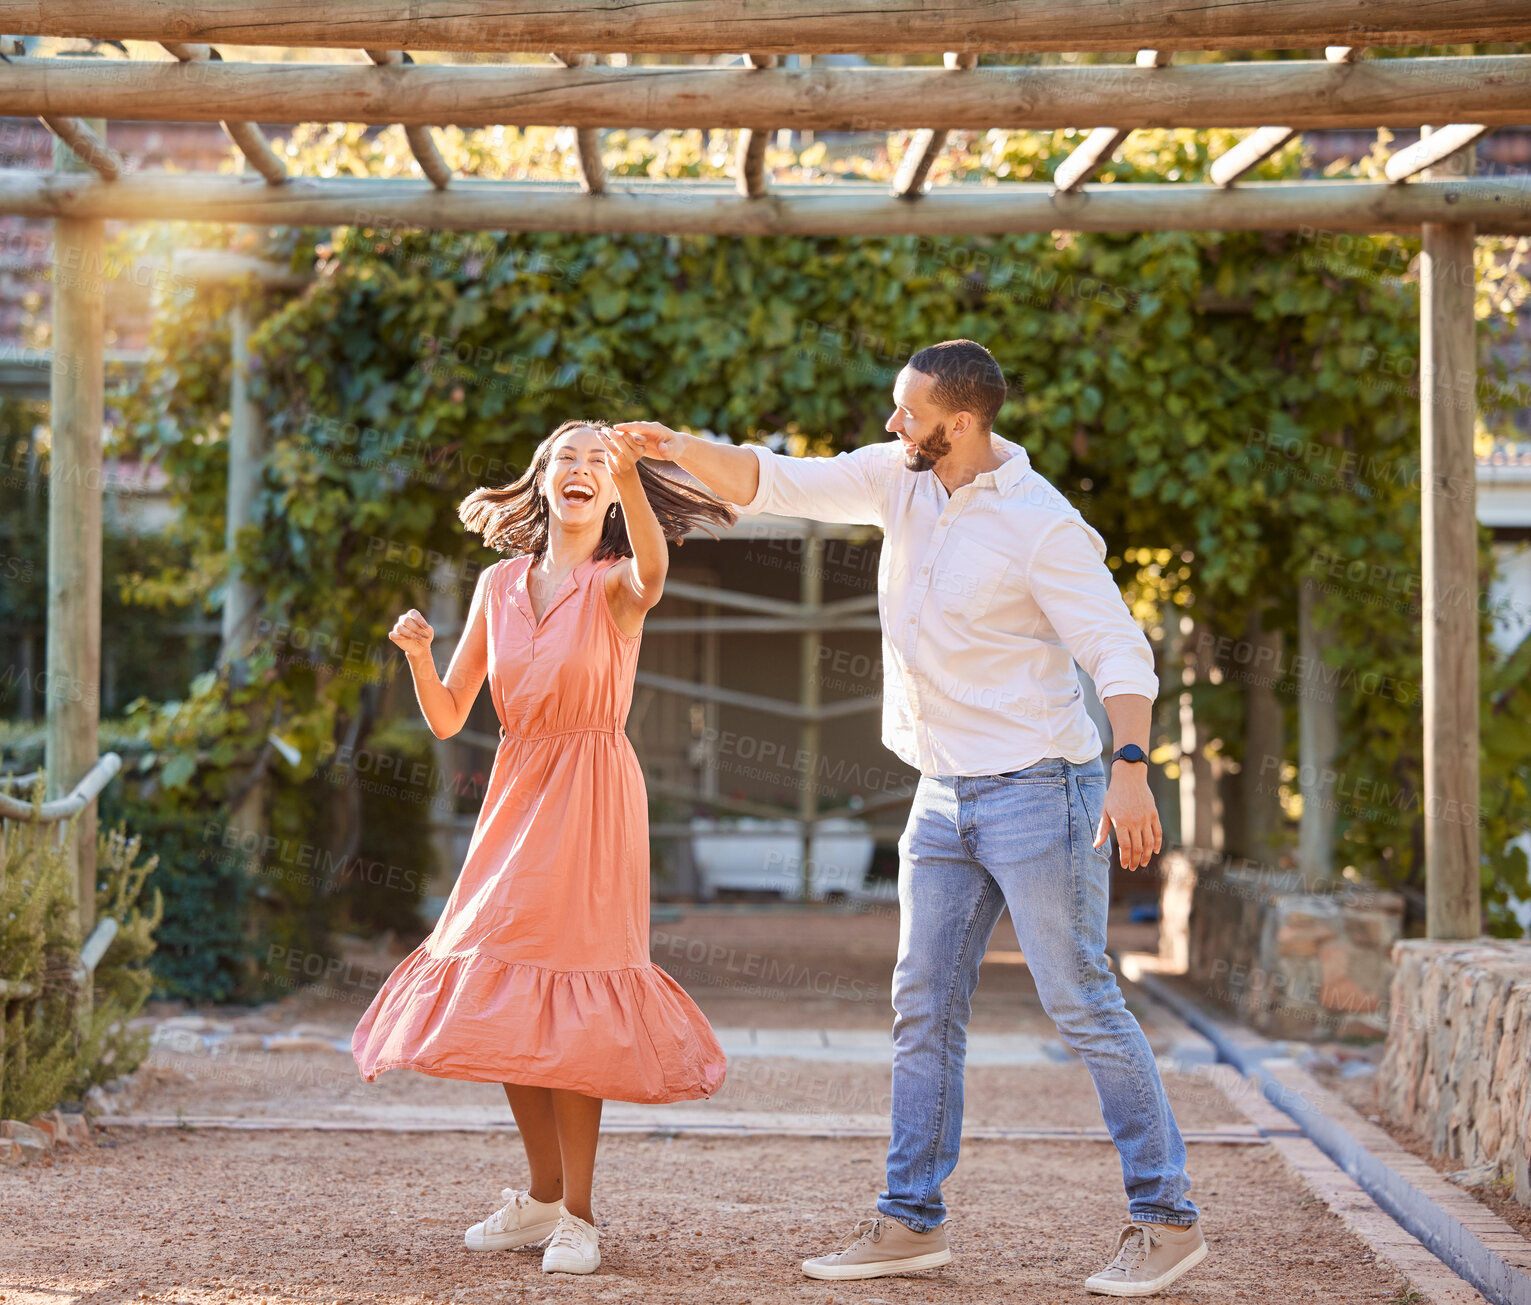 Buy stock photo Couple, happy dancing together and outdoor love to celebrate relationship, cute dance spin and relationship activity. Woman laughing, romantic man and sunset summer romance date at nature restaurant 